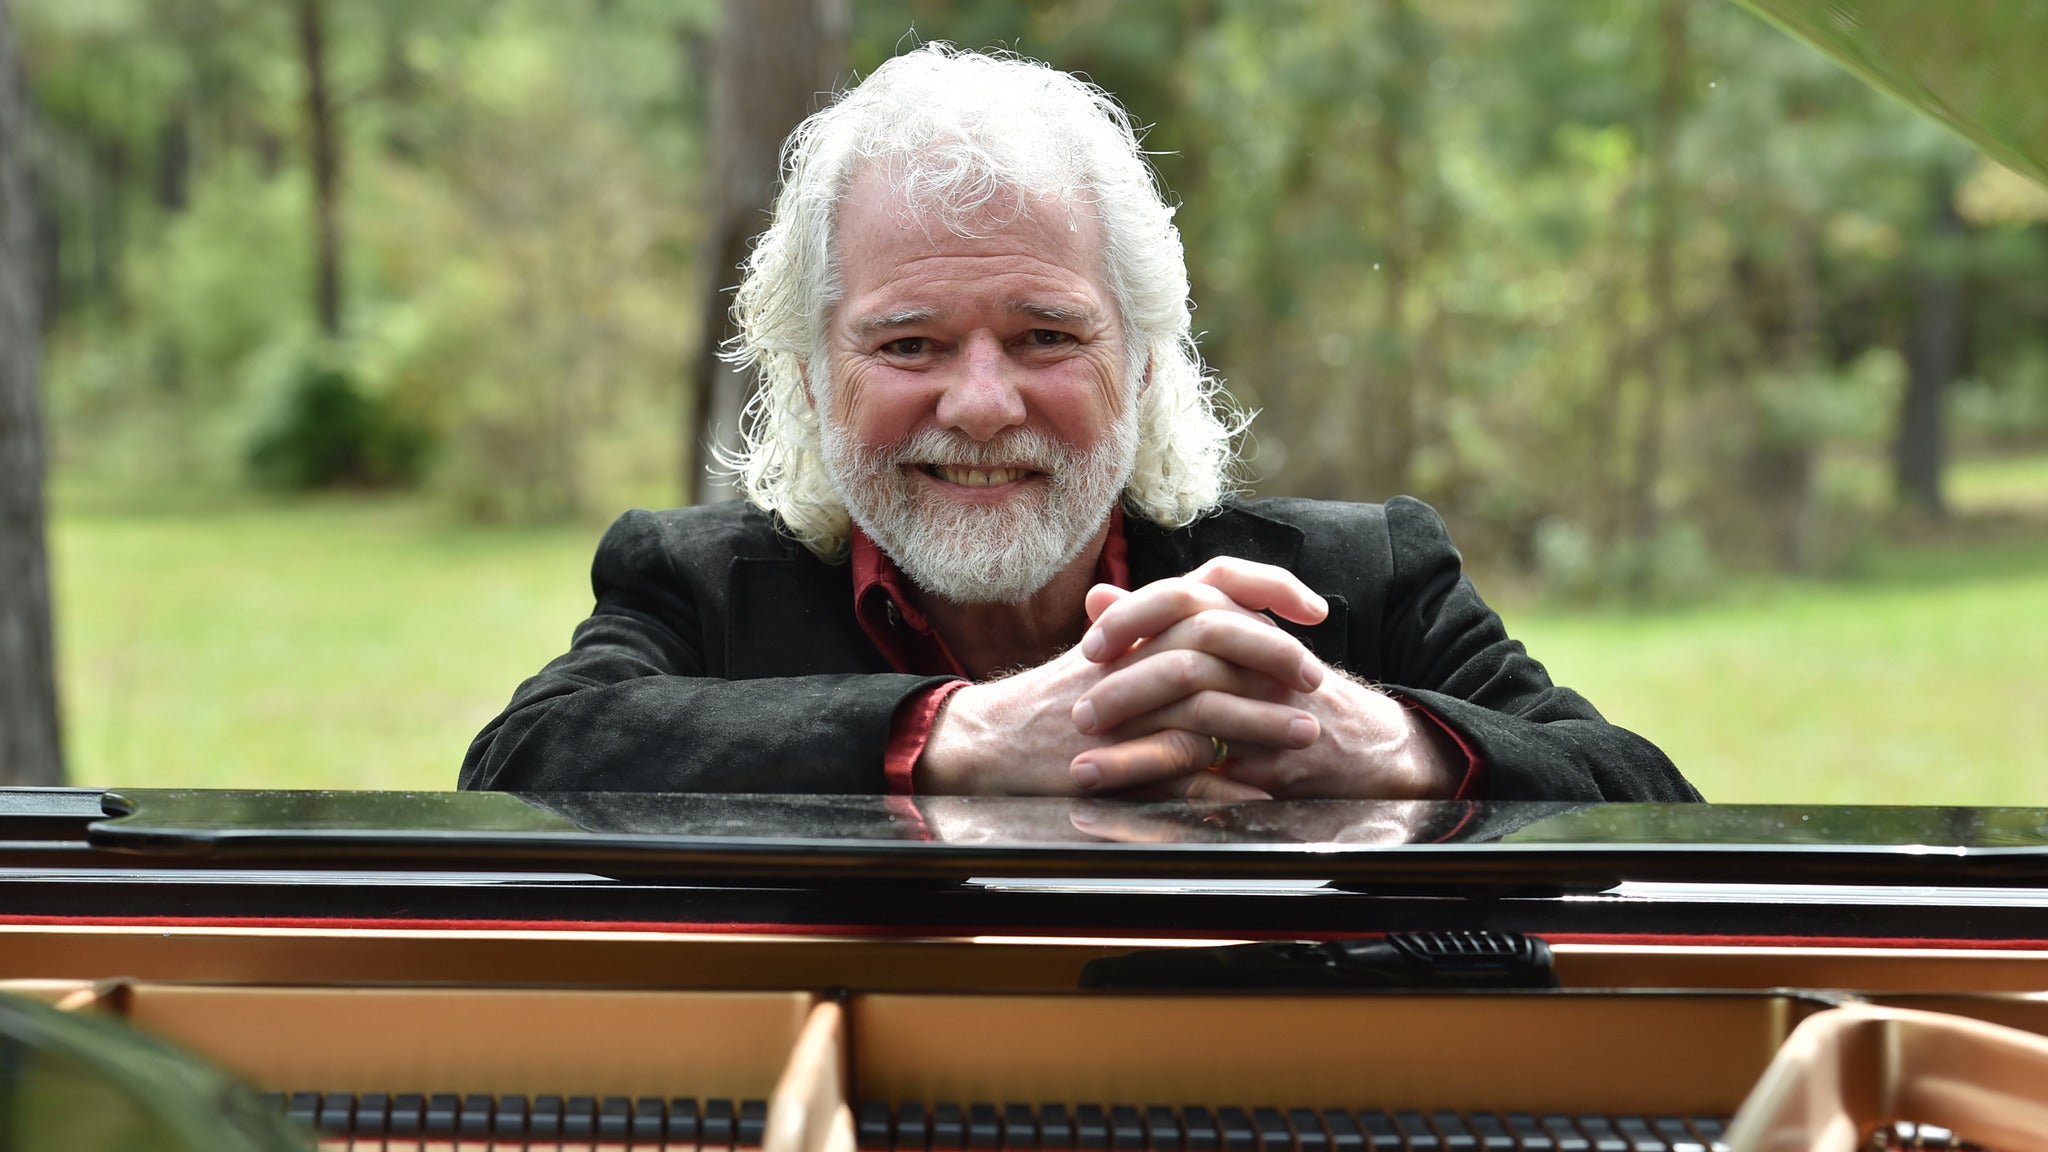 Chuck Leavell and his Big Band in New York promo photo for Live Nation Mobile App presale offer code